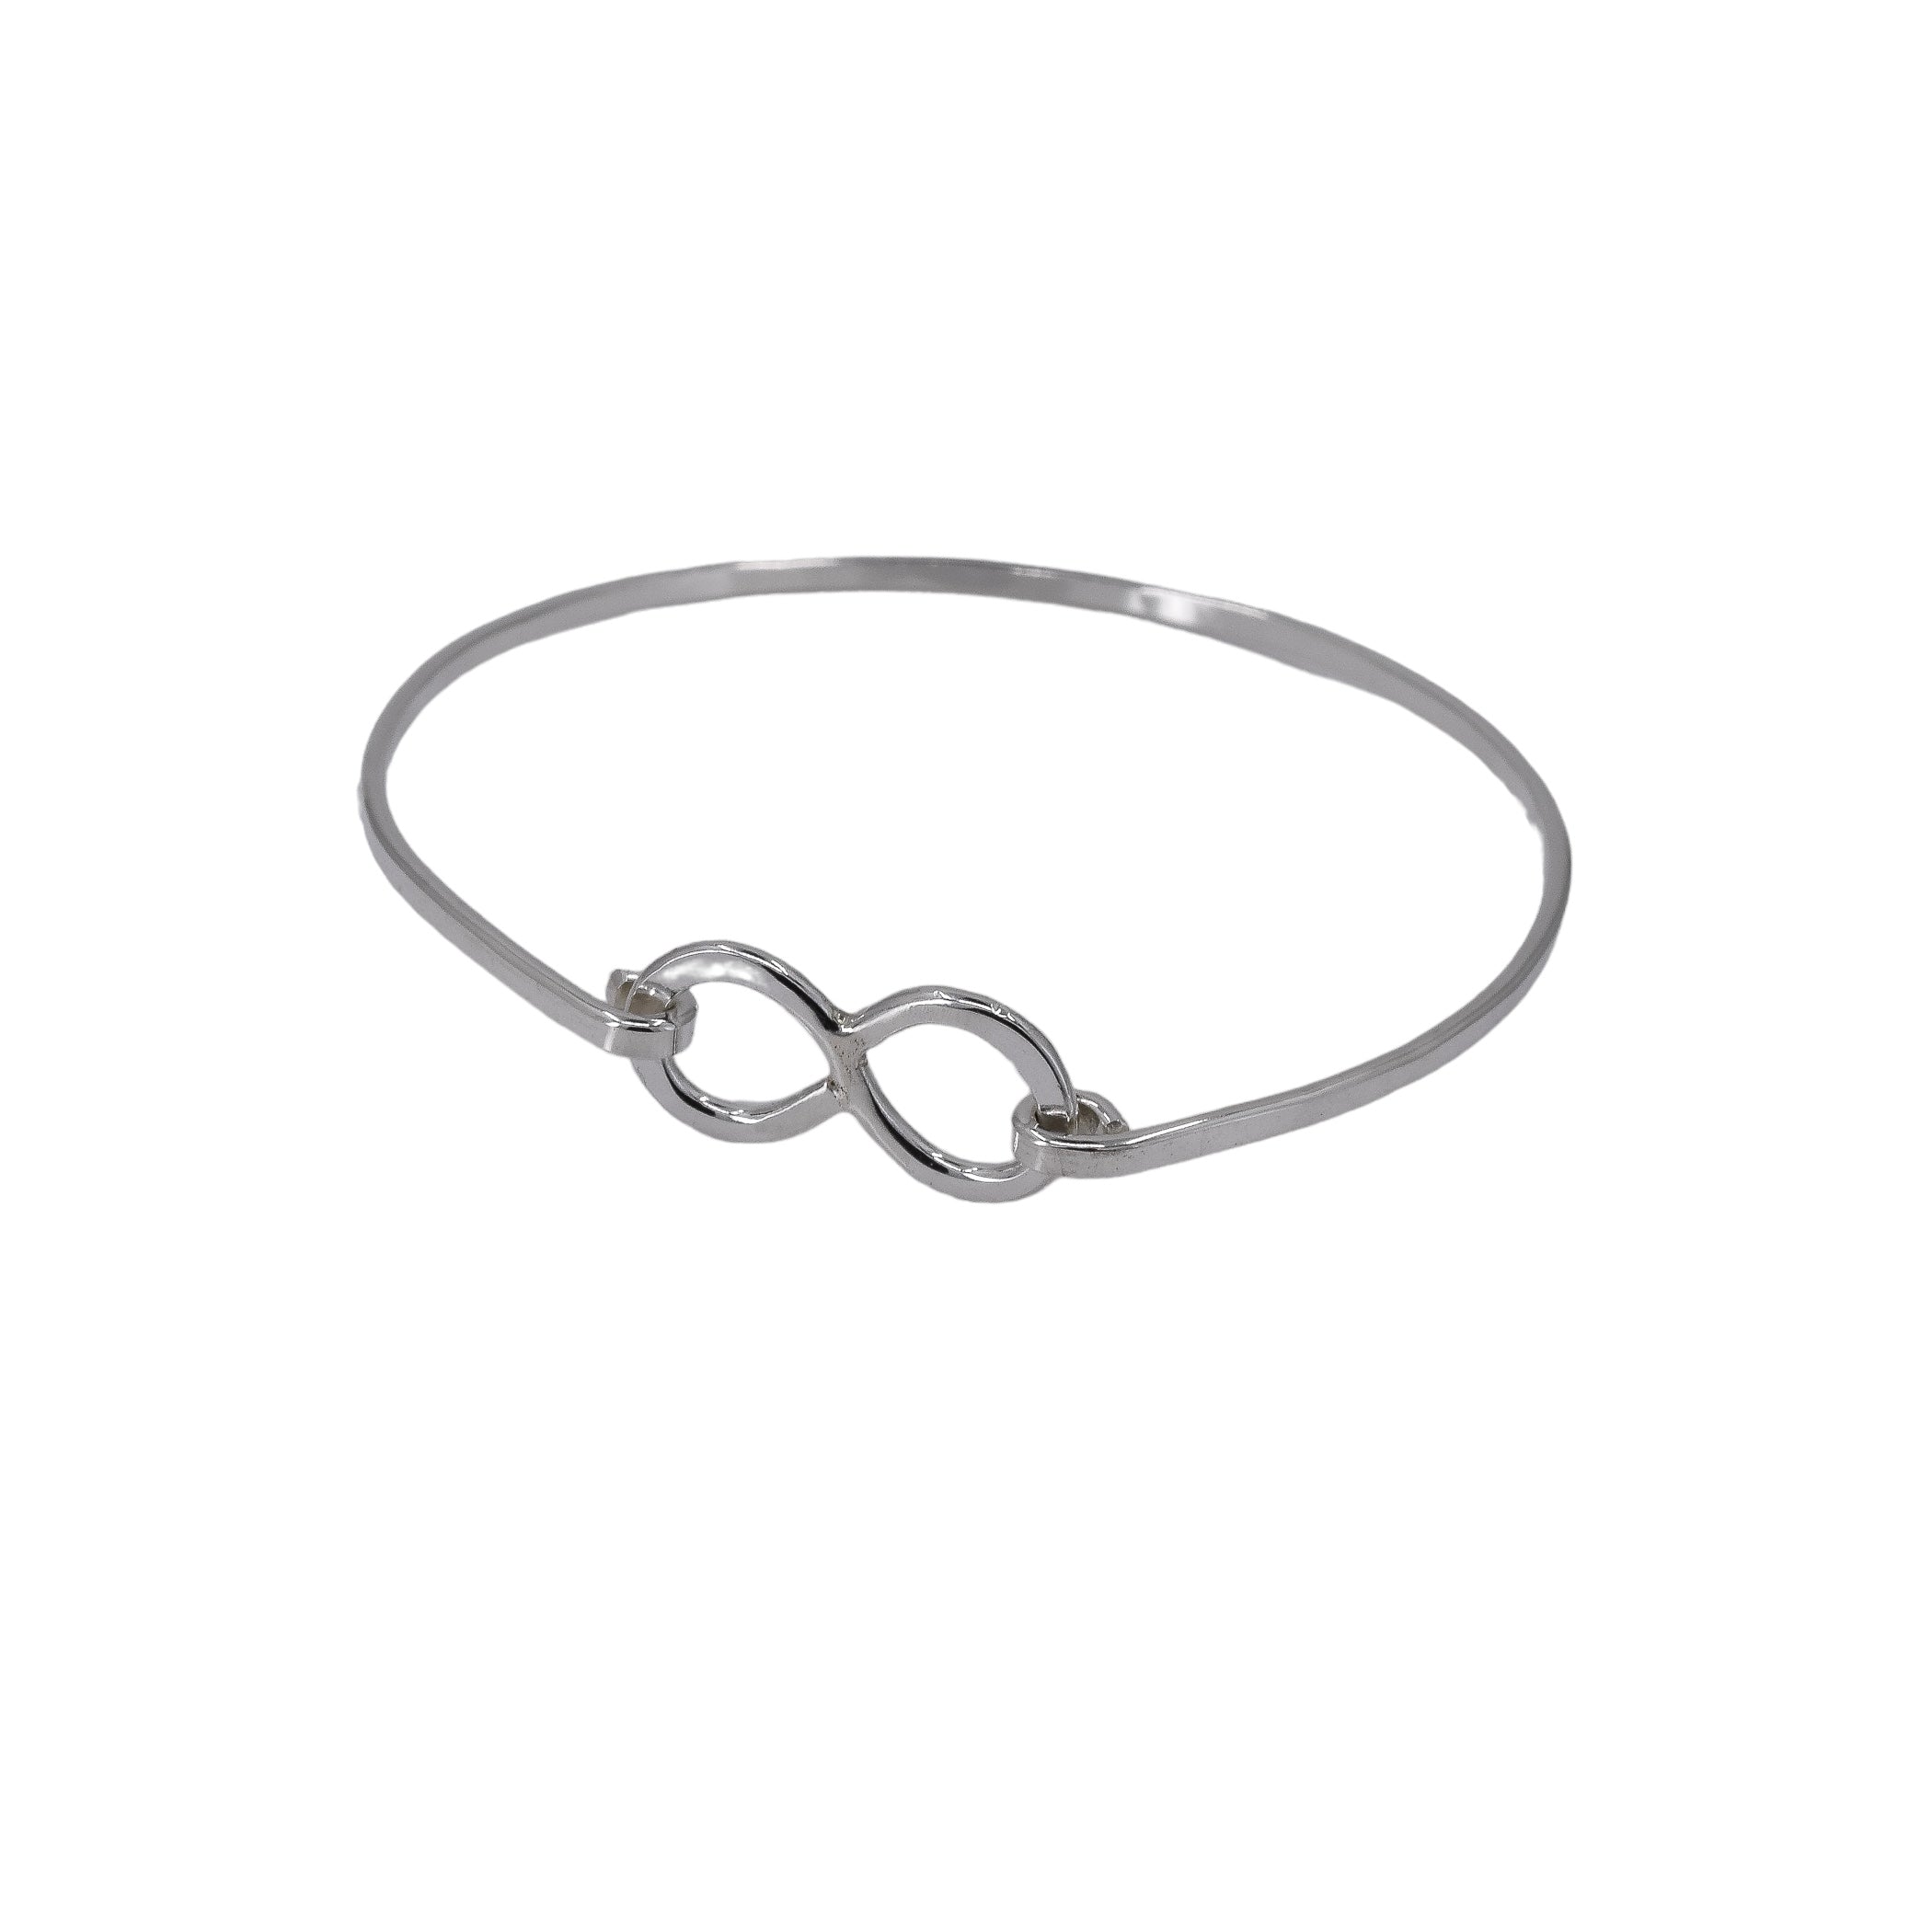 Infinity open bangle bracelet in sterling silver with hinged design